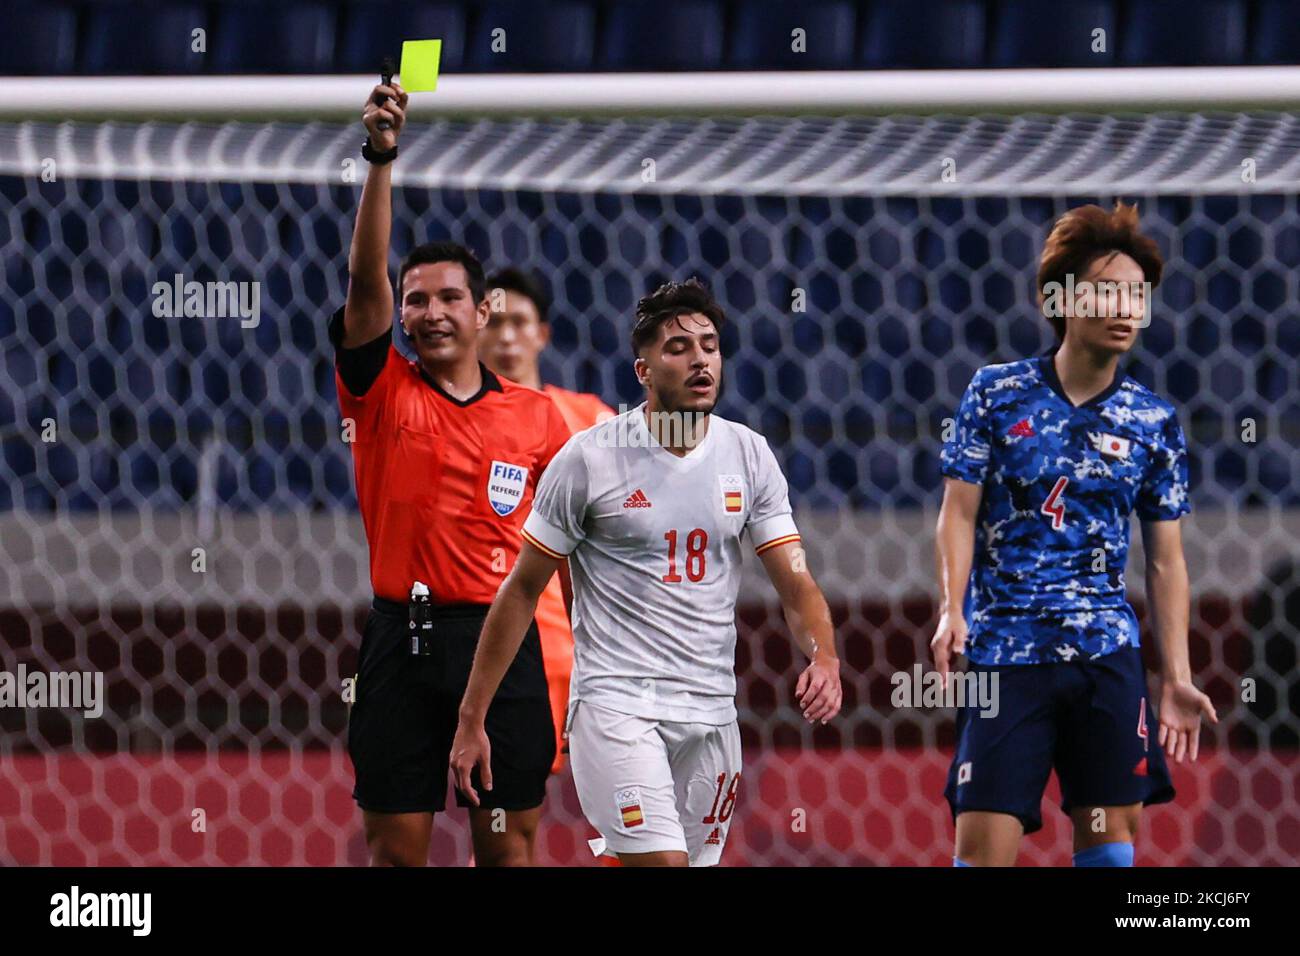 Referee ORTEGA Kevin yellow card to (18) Ayase UEDA of Team Spain during the match between Japan and Spain on day eleven of the Tokyo 2020 Olympic Games at Saitama Stadium (Photo by Ayman Aref/NurPhoto) Stock Photo